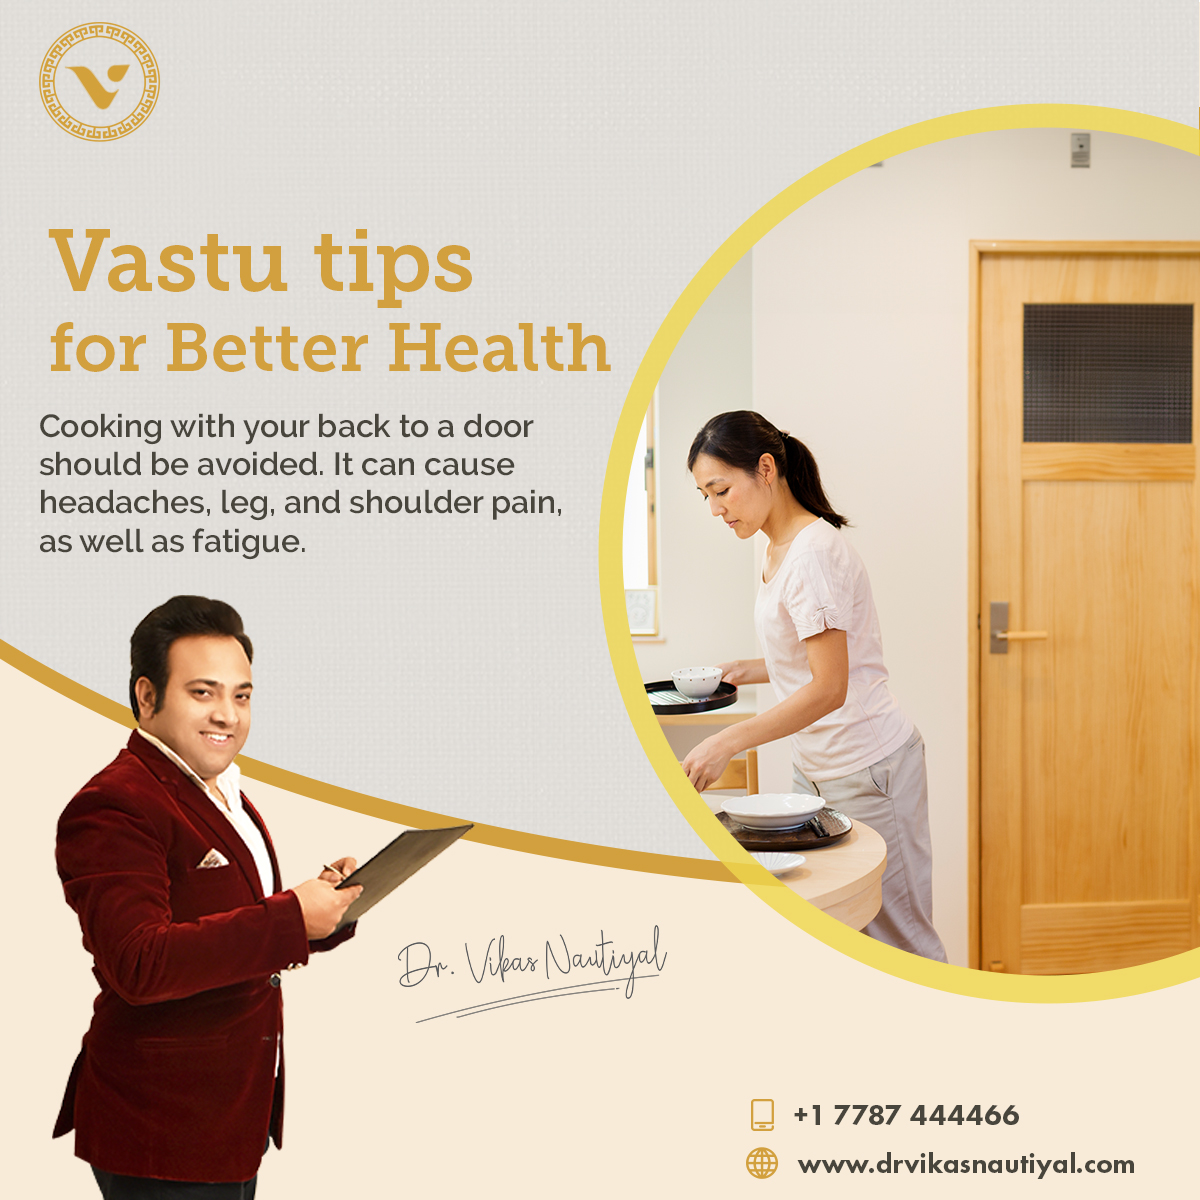 Vastu tips for better health

Cooking with your back to a door should be avoided. It can cause headaches, leg, and shoulder pain, as well as fatigue.

#vastu #vastuforhome #vastuforhealth #vastutips #vastulogy #vastuconsultant #drvikasnautiyal  #vastushastra #health